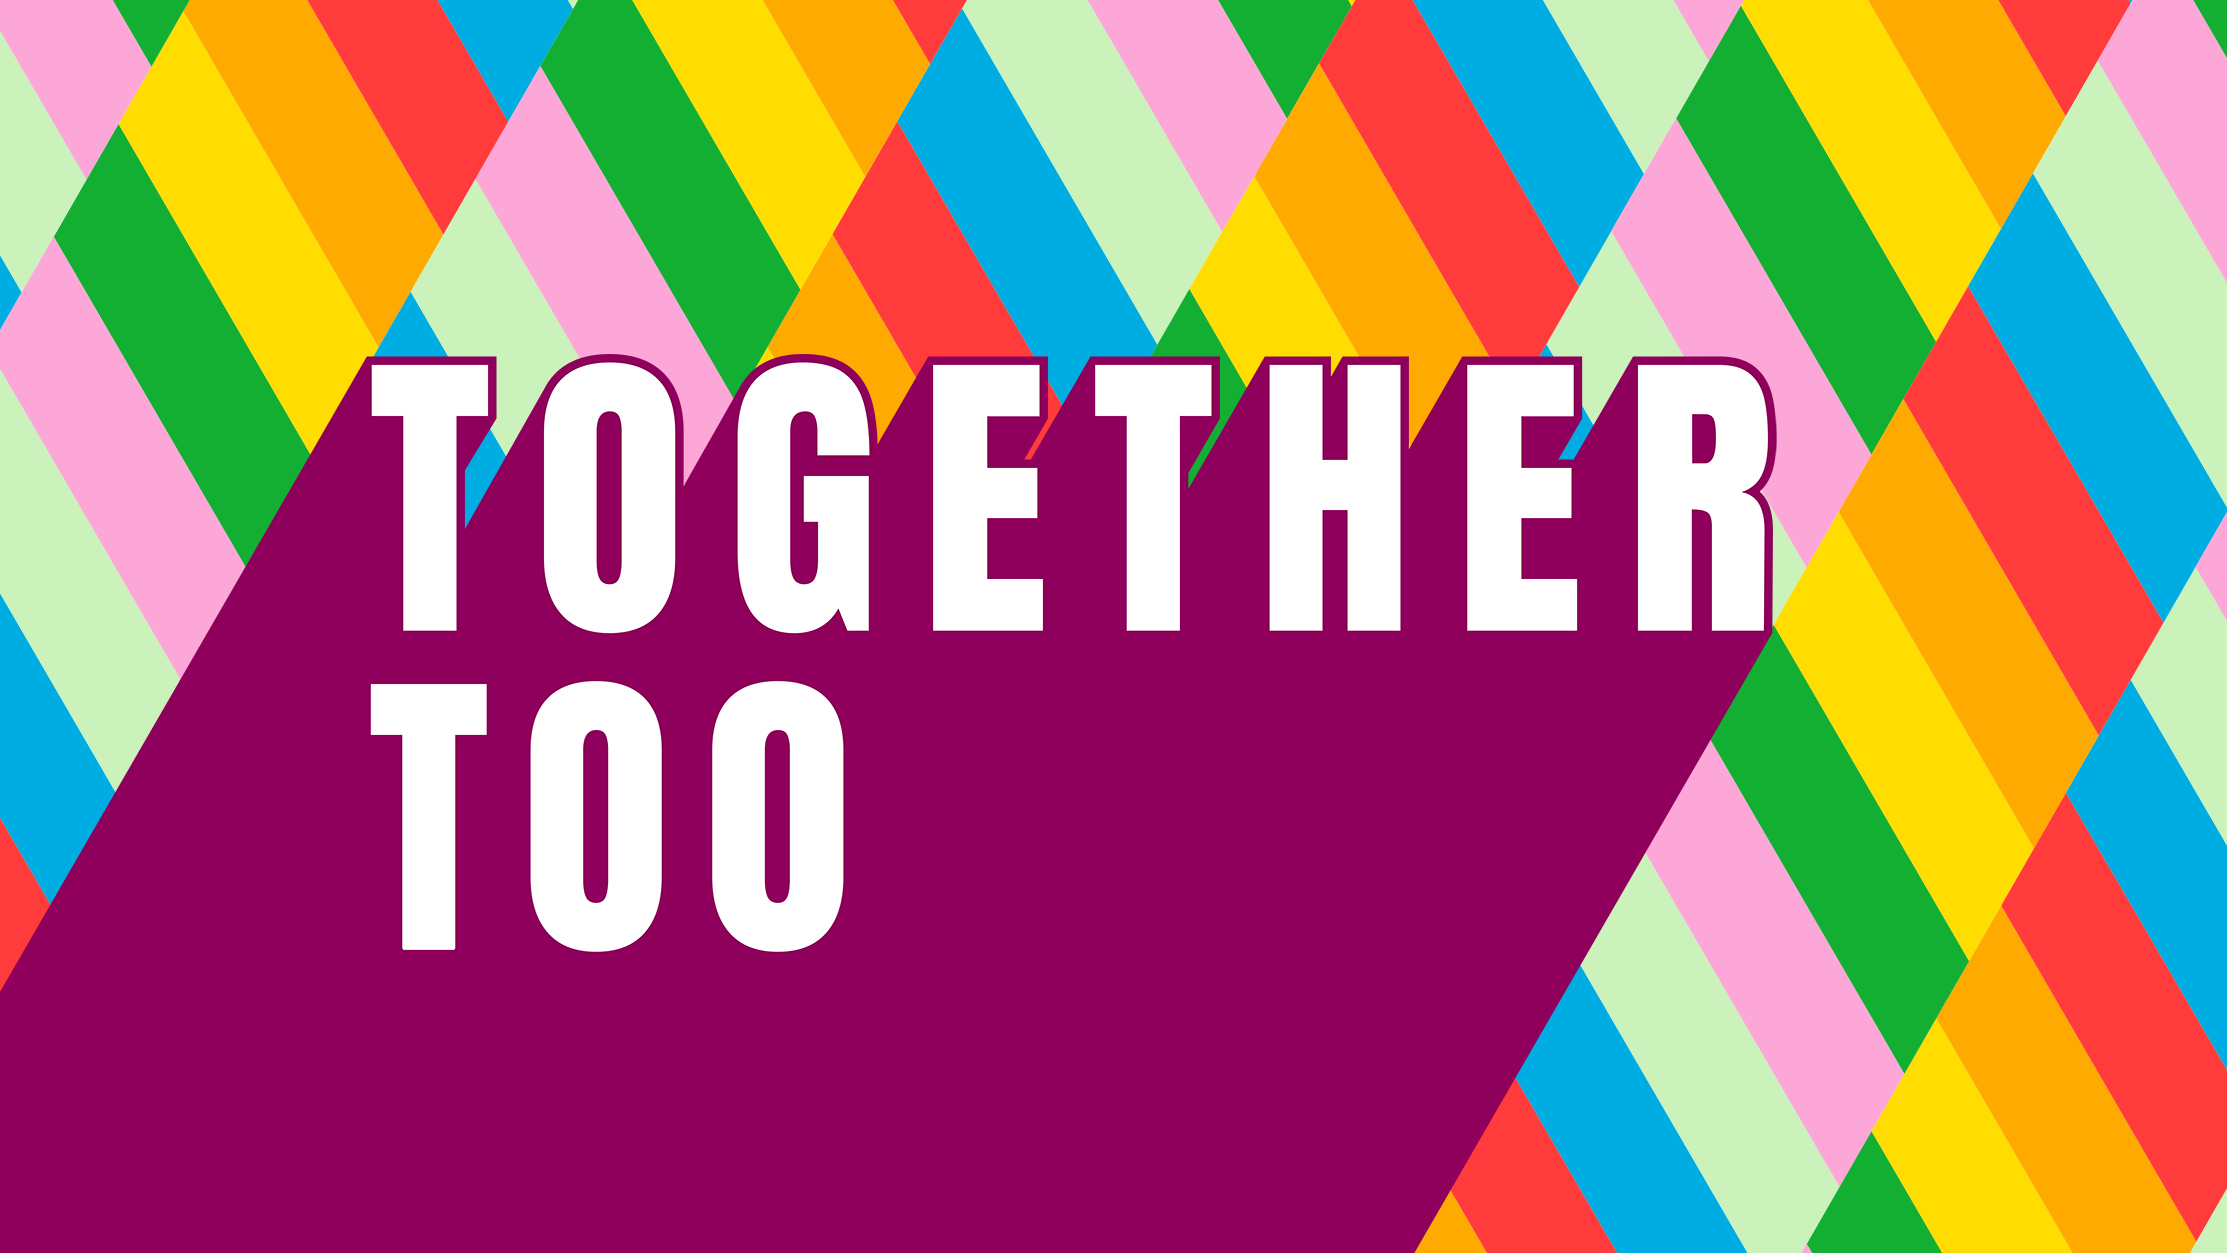 Text against a striped rainbow background: TOGETHER TOO